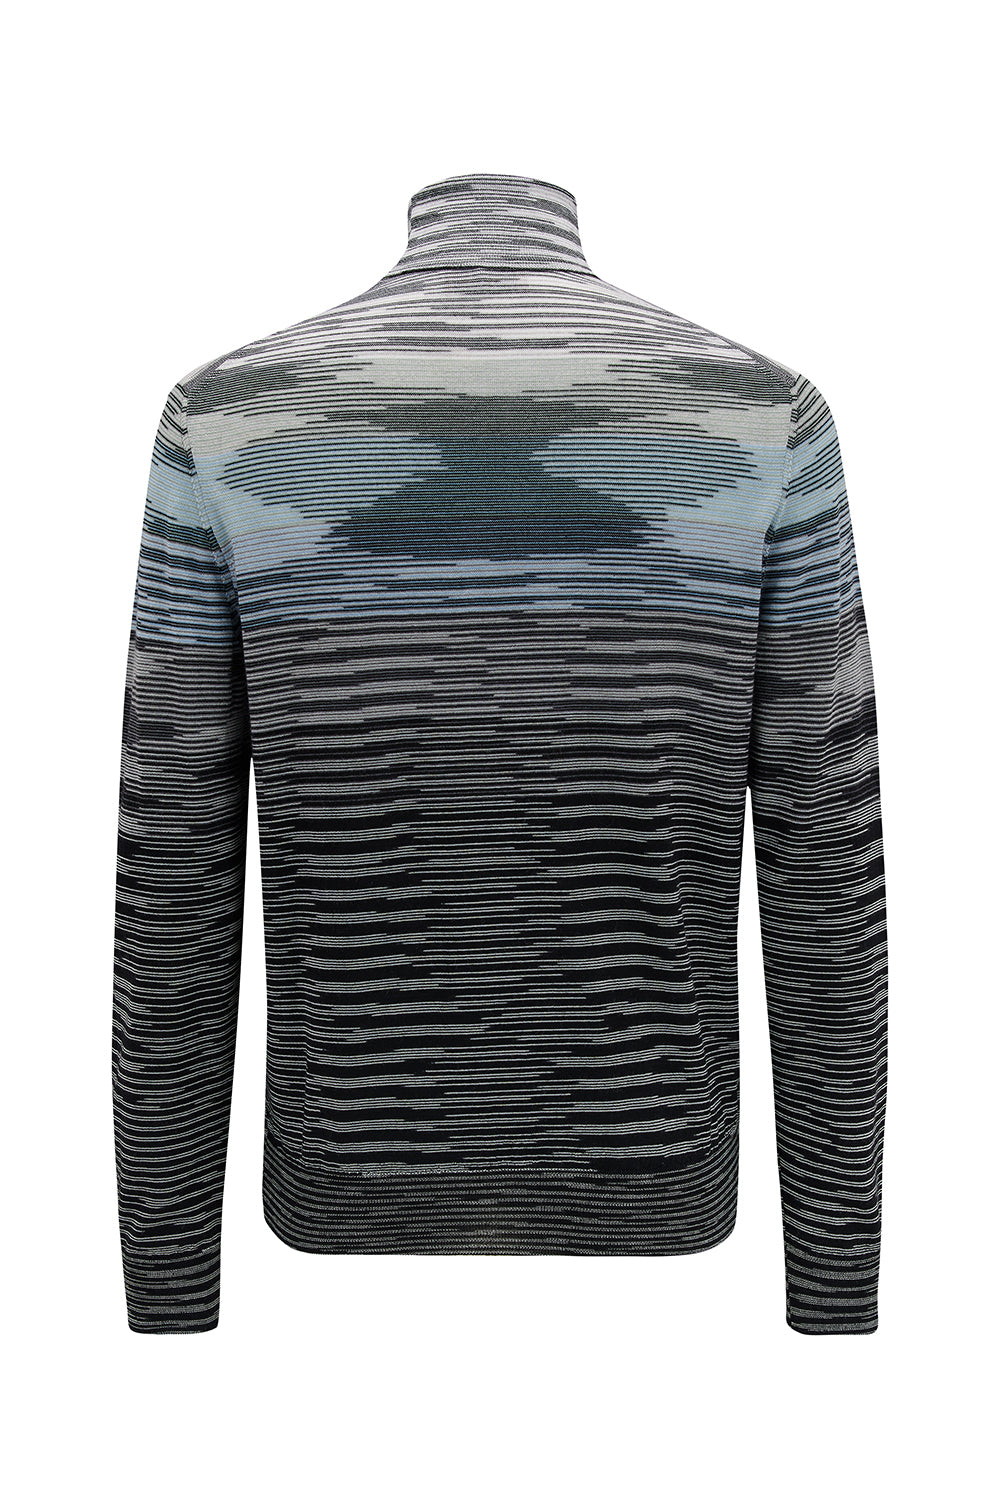 Missoni Space-dye Roll Neck Sweater Blue - Back View